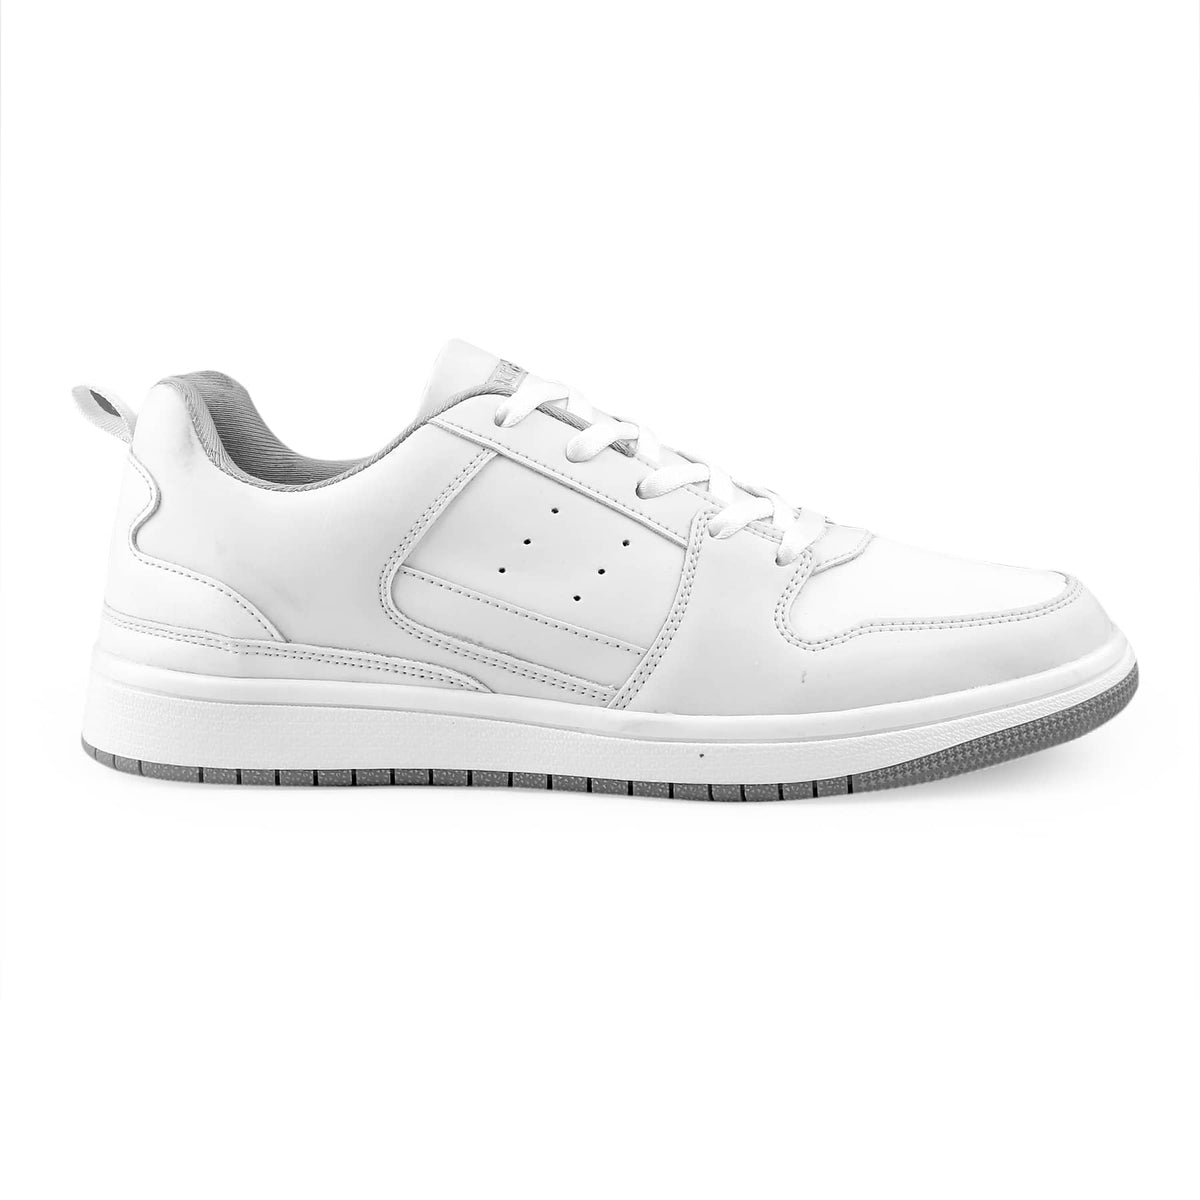 Bacca Bucci Multiverse Sneakers/Casual Shoe that Change its Color (BBMH9063)